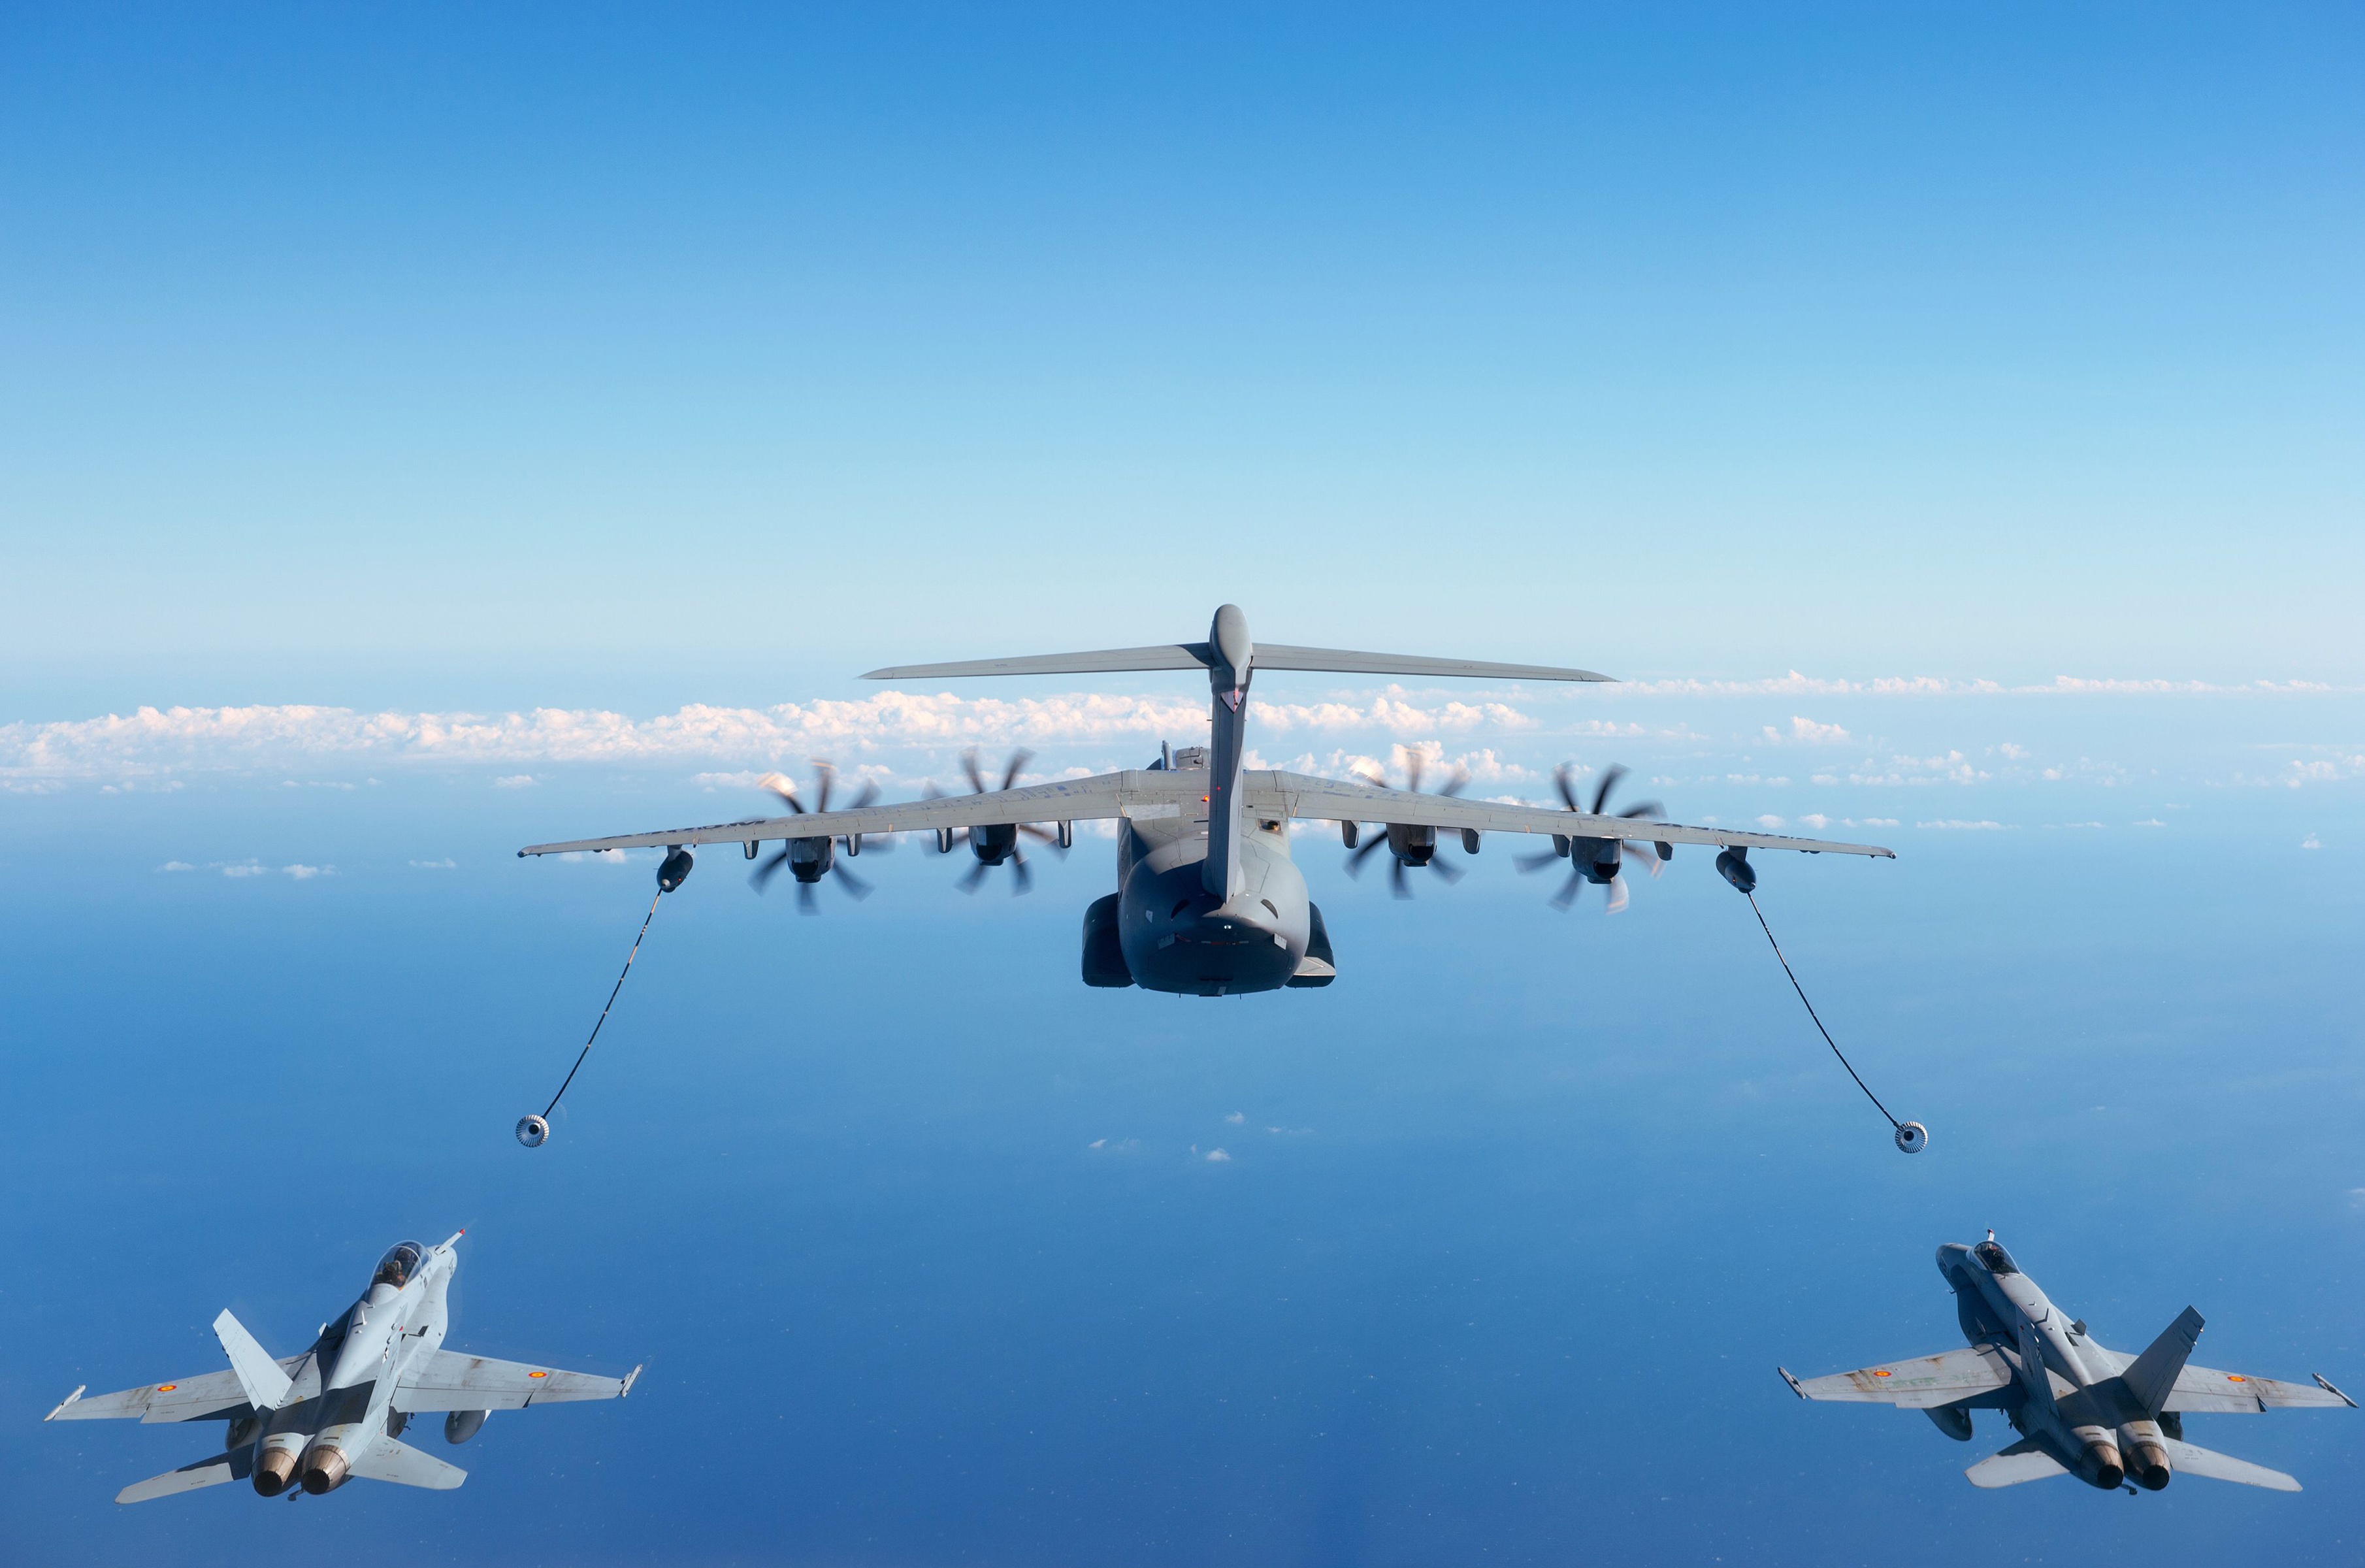 Airbus A400M Wallpapers